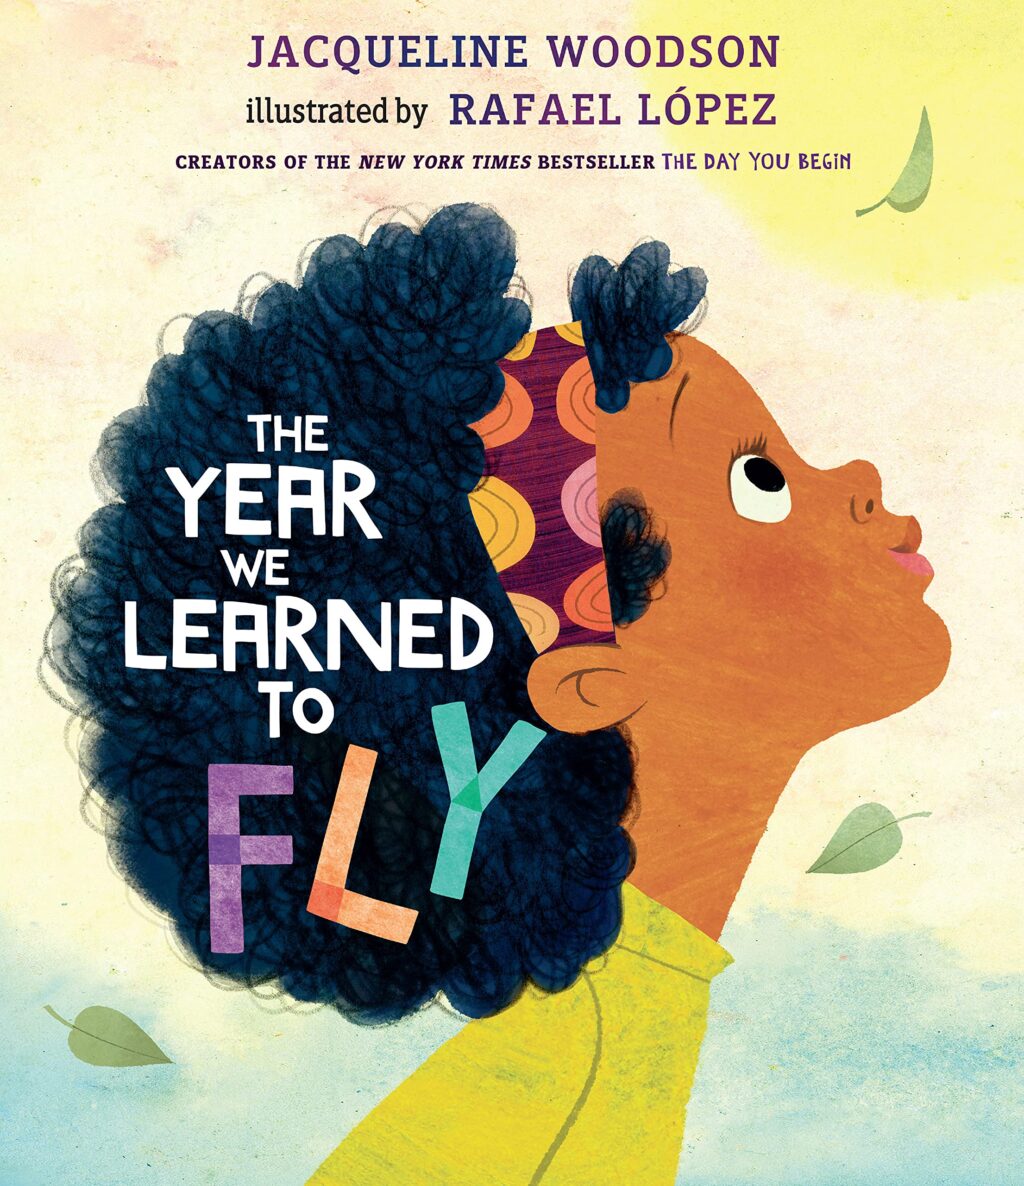 The Year We Learned to Fly by Jacqueline Woodson and more new books for winter 2022